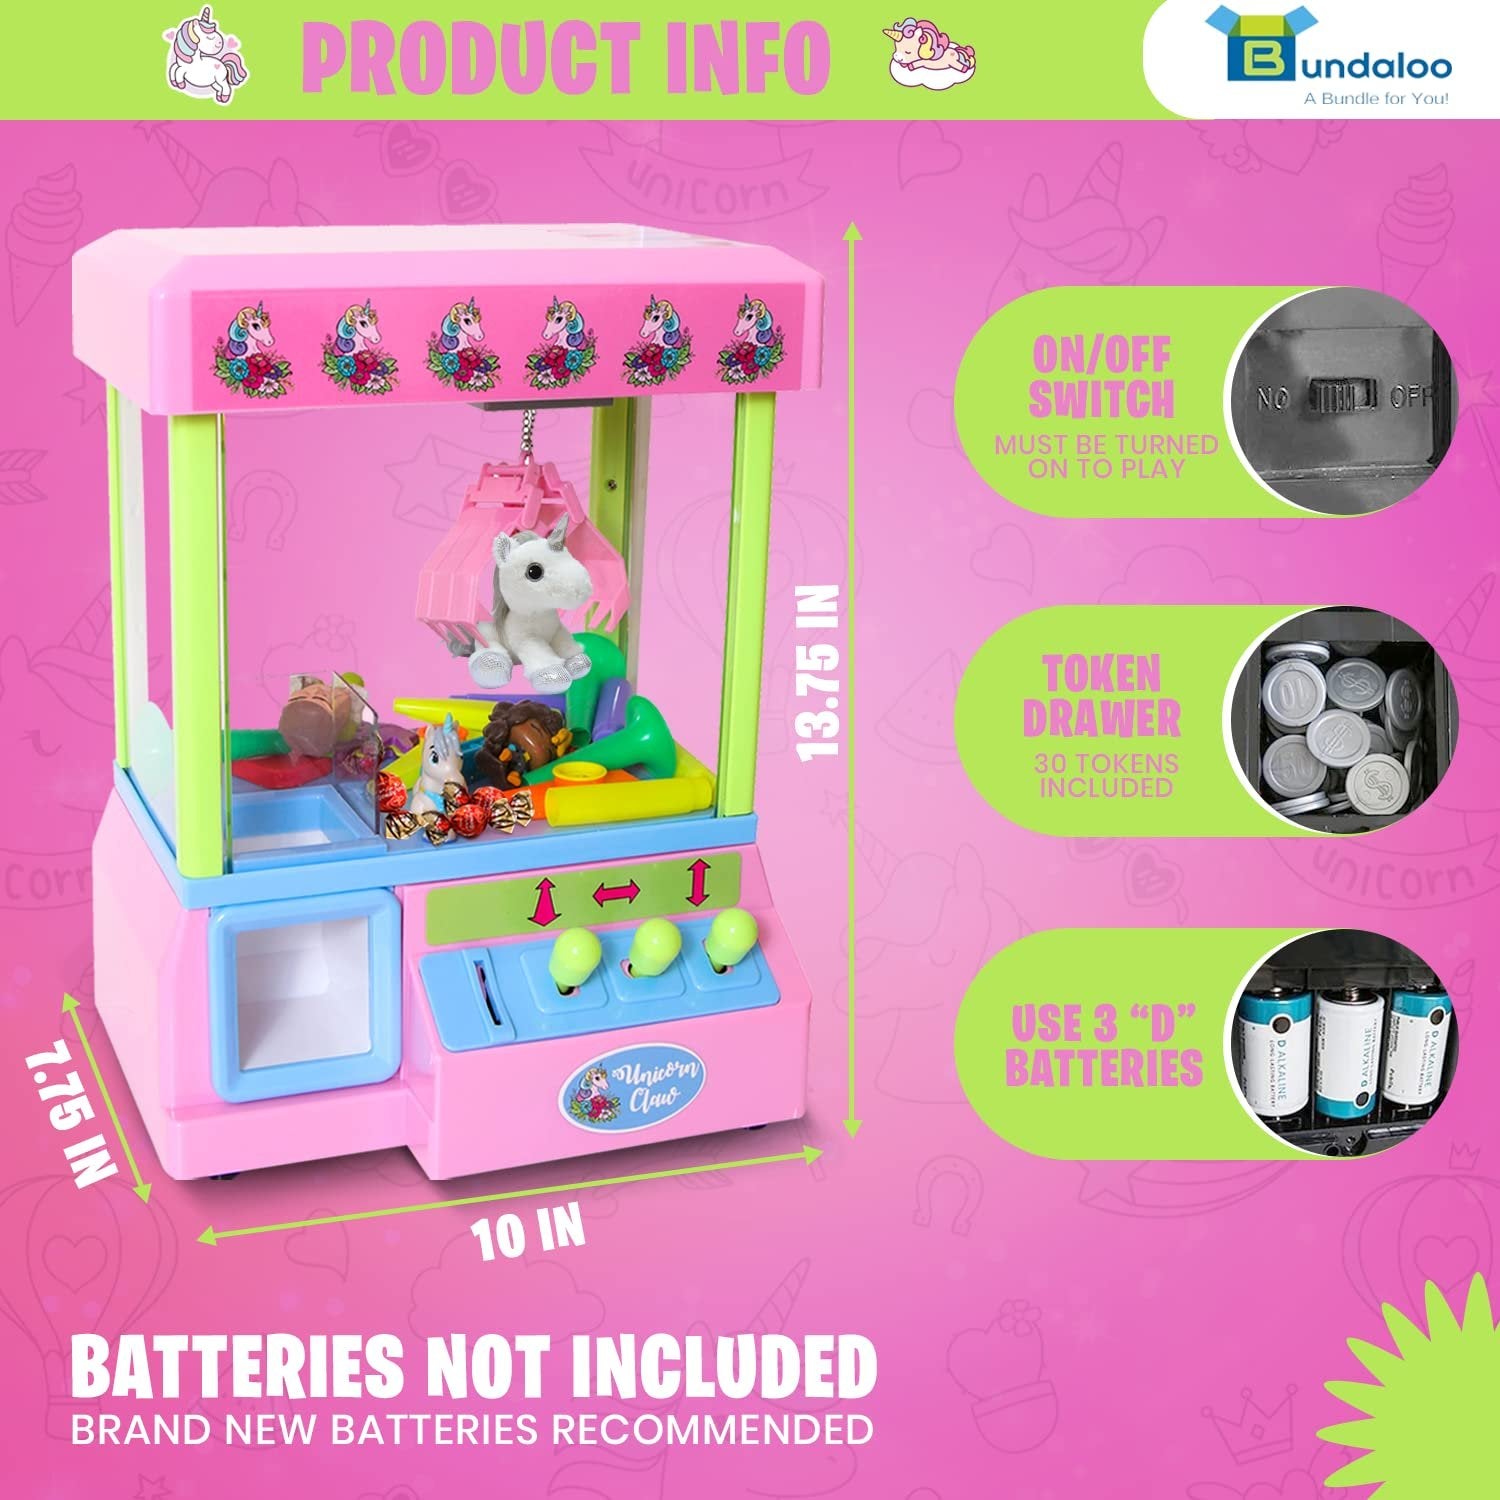 Bundaloo Claw Machine Arcade Game with Sound, Unicorn Themed Mini Candy Grabber Prize Dispenser Vending Toy for Kids, Boys & Girls